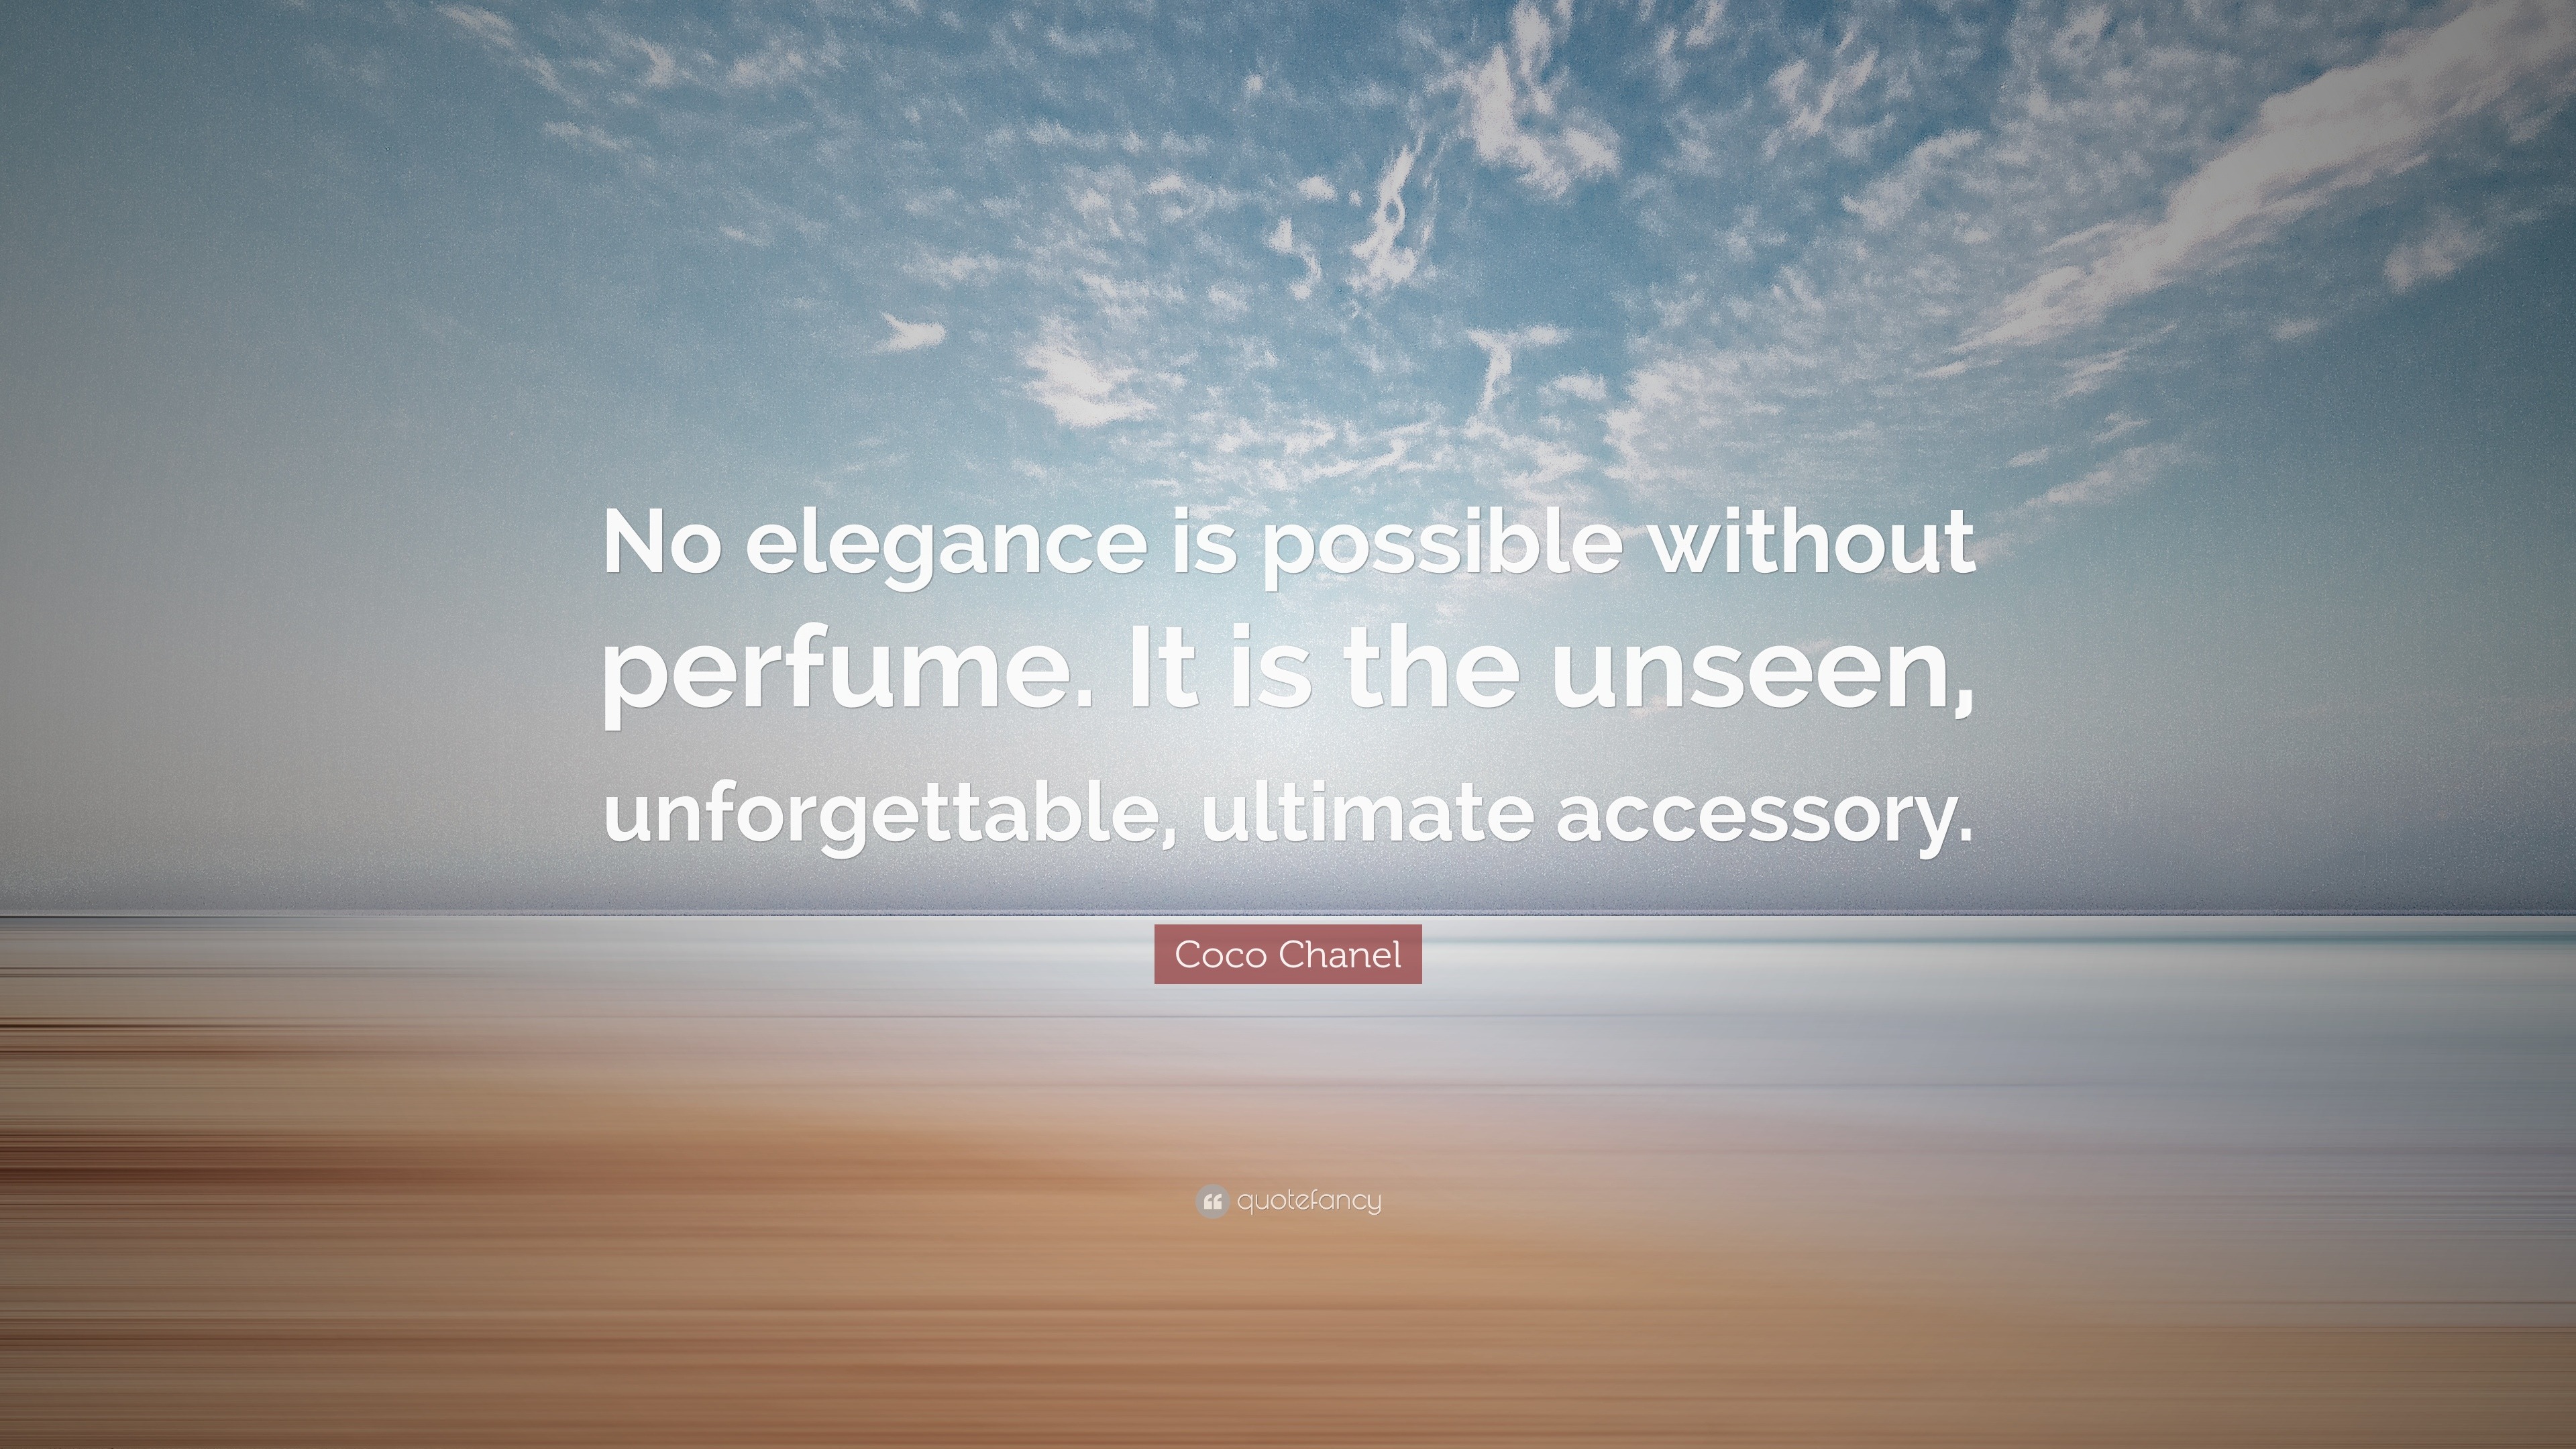 Coco Chanel Quote: “No elegance is possible without perfume. It is the  unseen, unforgettable, ultimate accessory.”